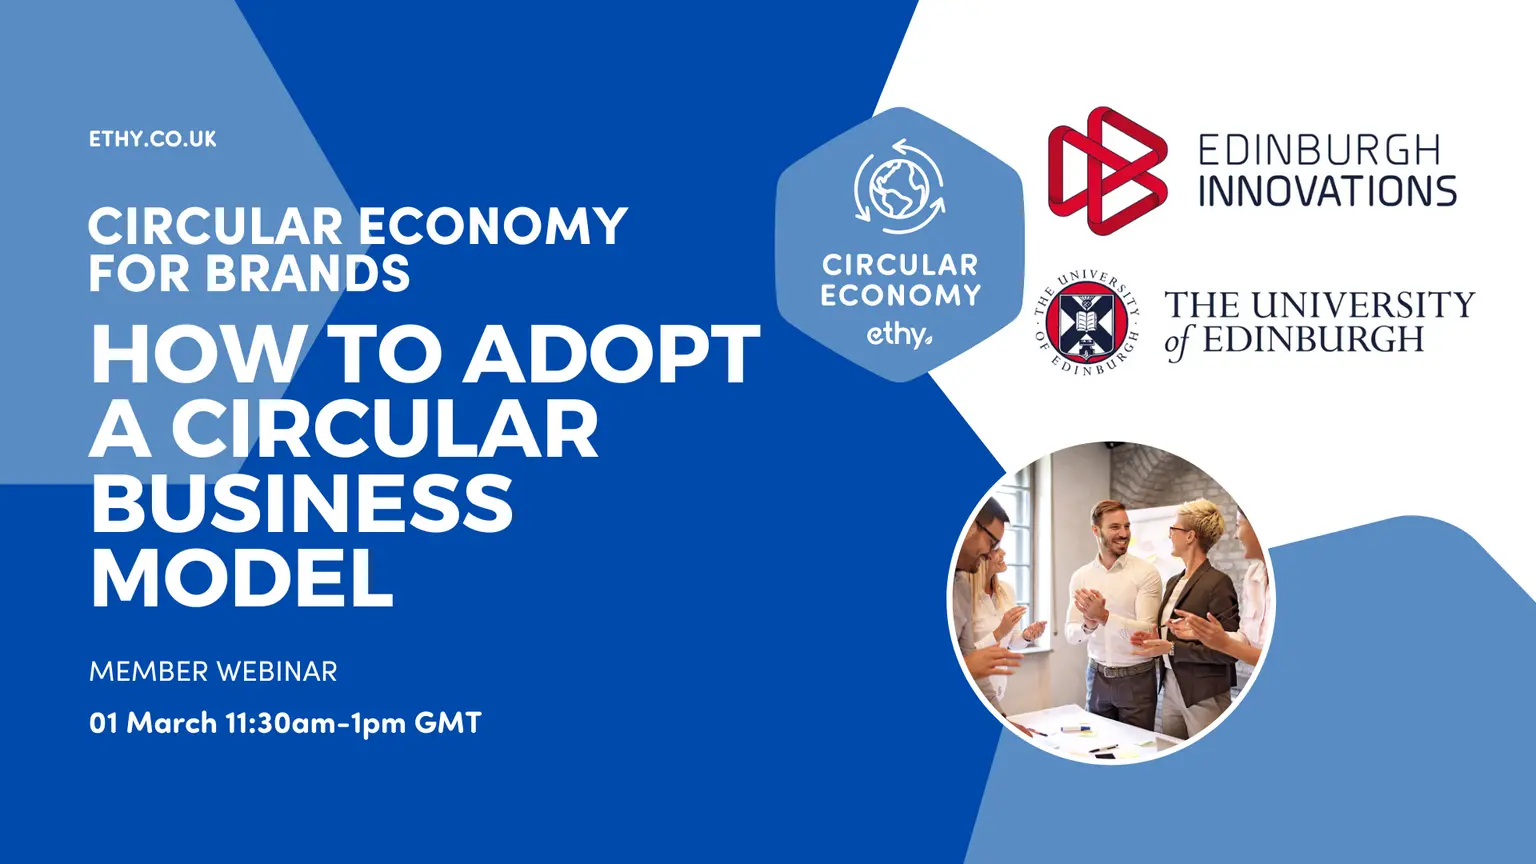 Circular Economy for Brands: How to Adopt a Circular Business Model